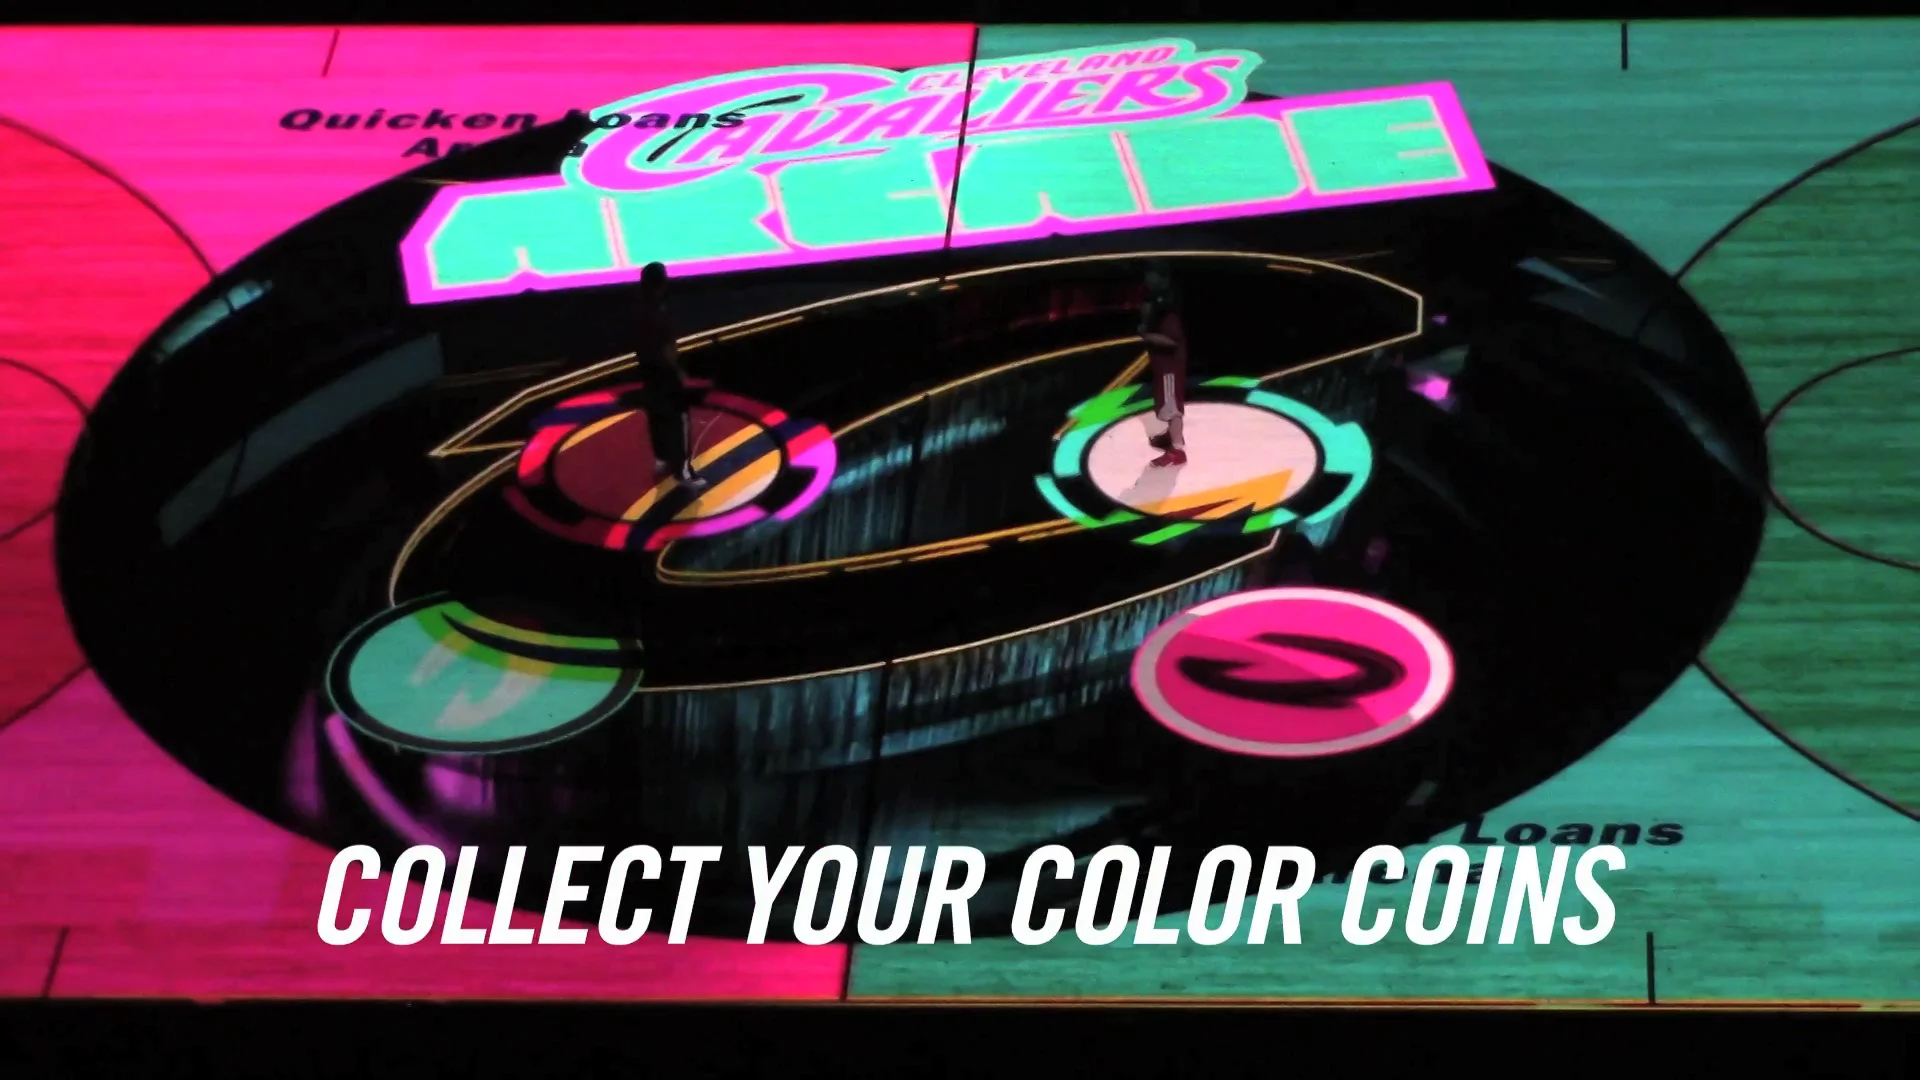 Cleveland Cavaliers Court Projection Arcade Game on Vimeo